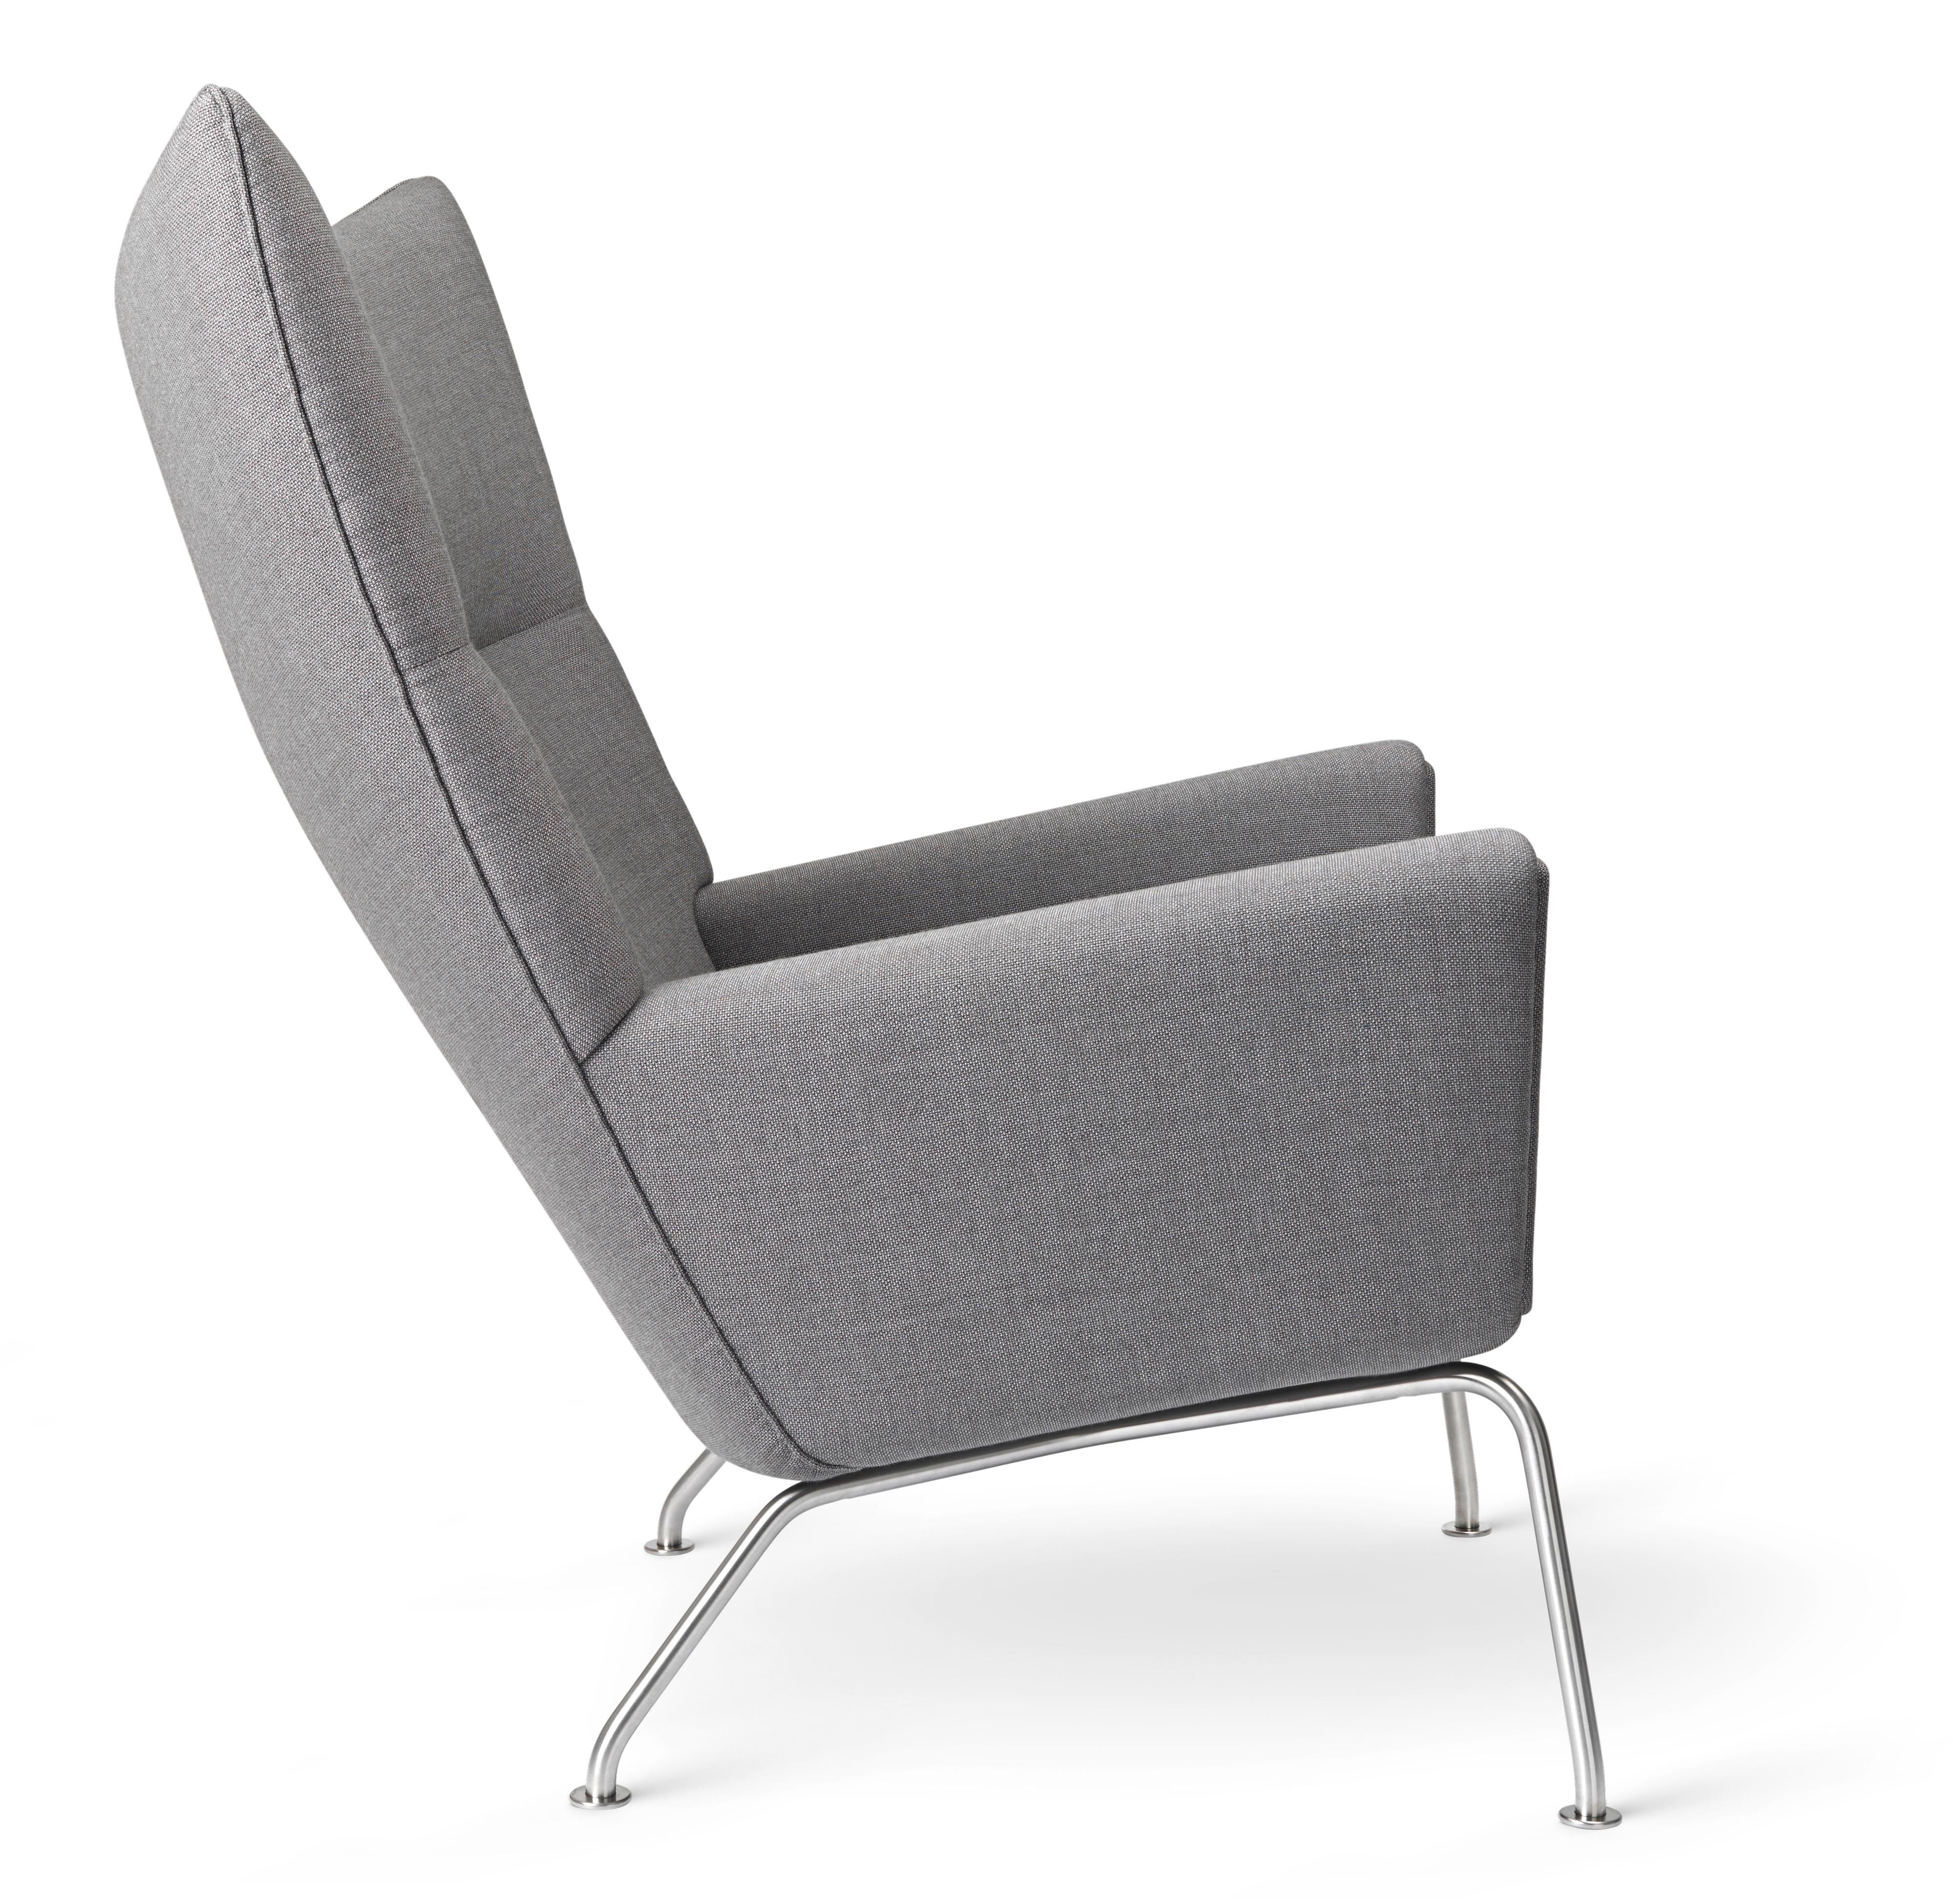 Carl Hansen CH445 Wing Chair Rustfrit Stål, Passion 6101